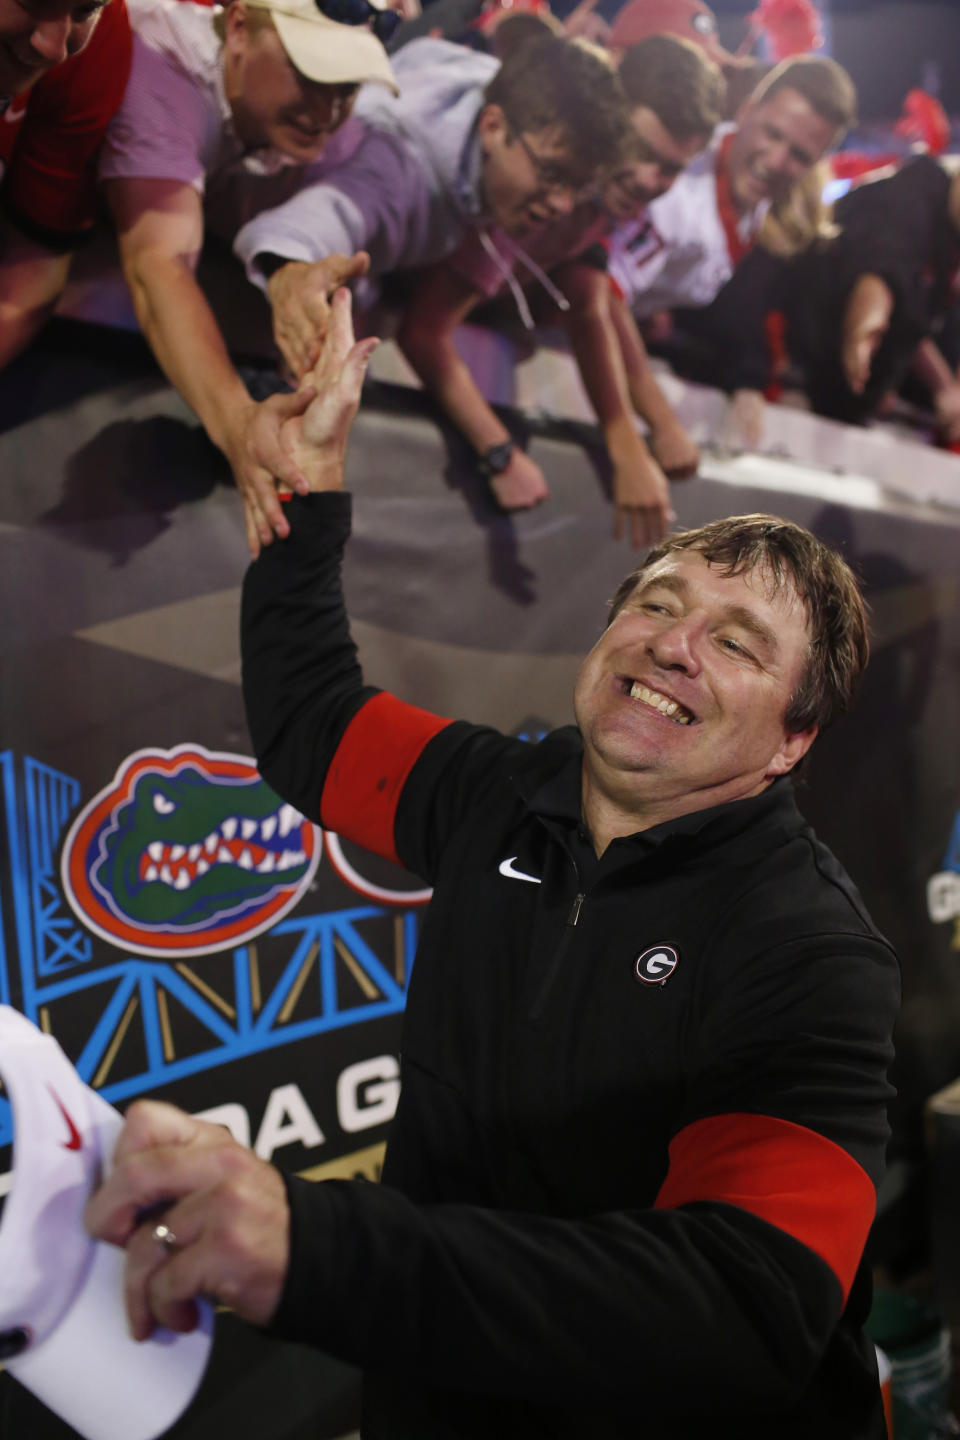 Georgia coach Kirby Smart celebrates with fans after the team's win over Florida in an NCAA college football game Saturday, Nov. 2, 2019, in Jacksonville, Fla. (Joshua L. Jones/Athens Banner-Herald via AP)